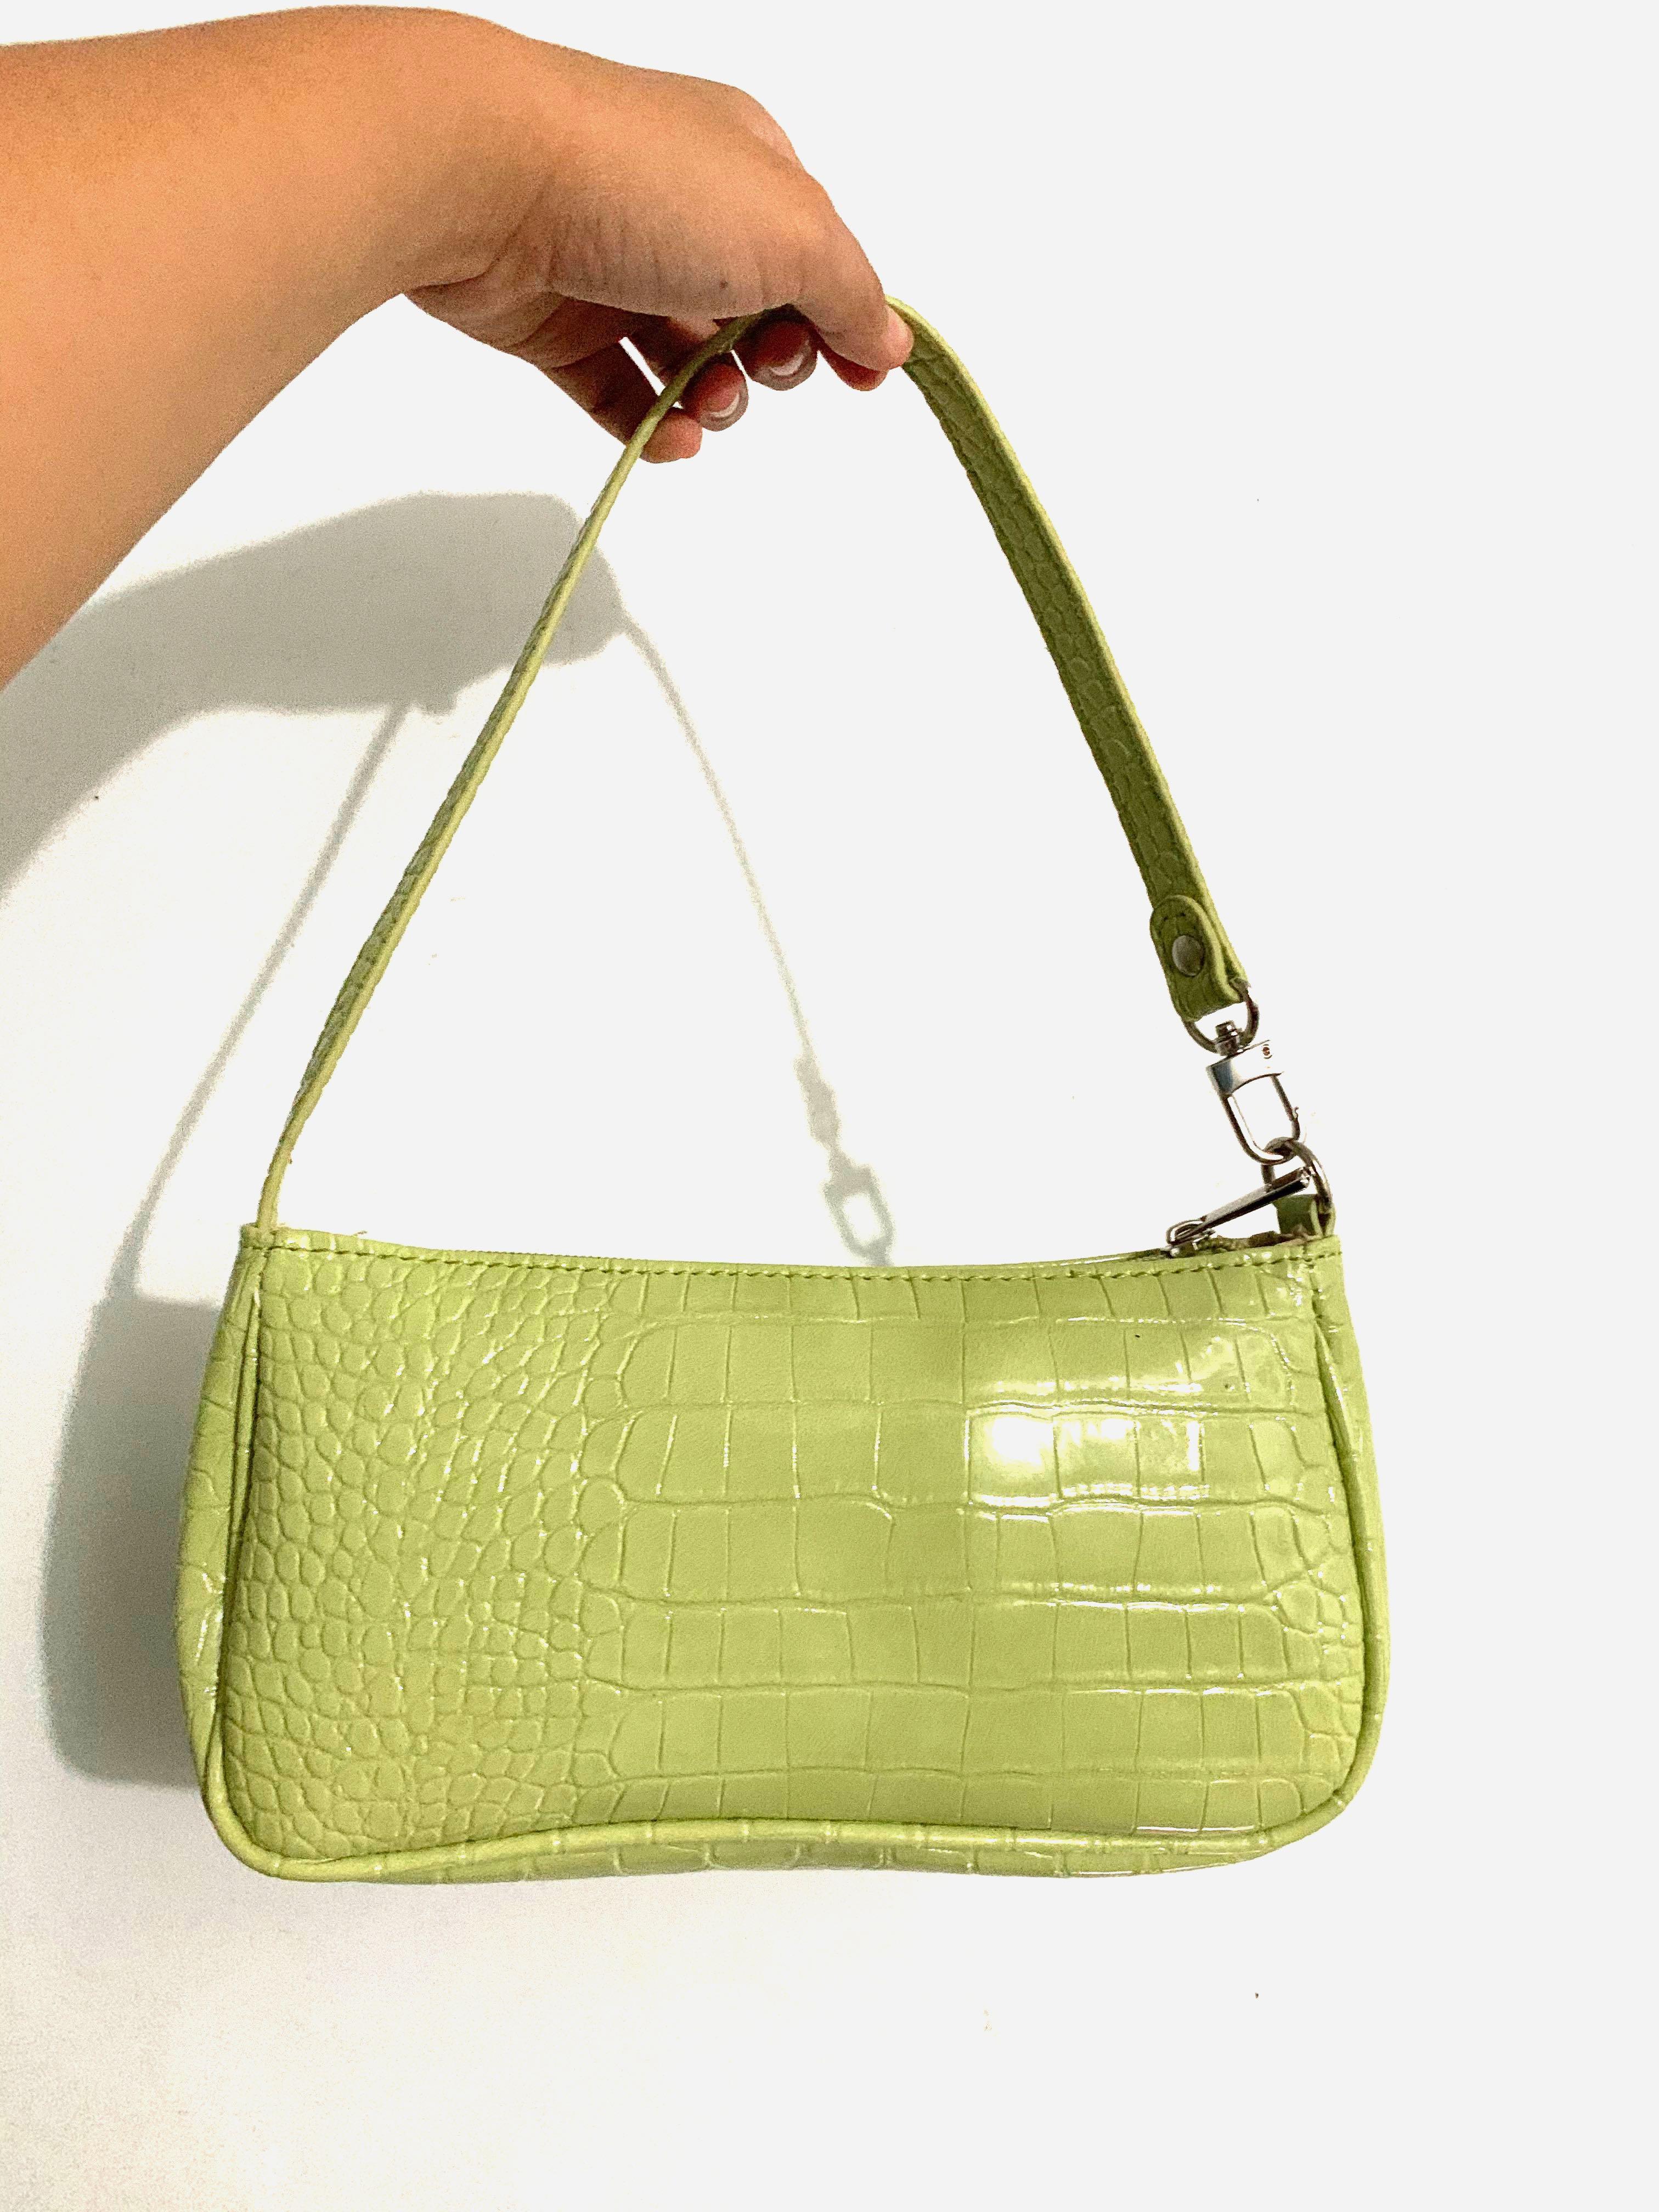 Emerald Green Leather Purse - The Choctaw Store